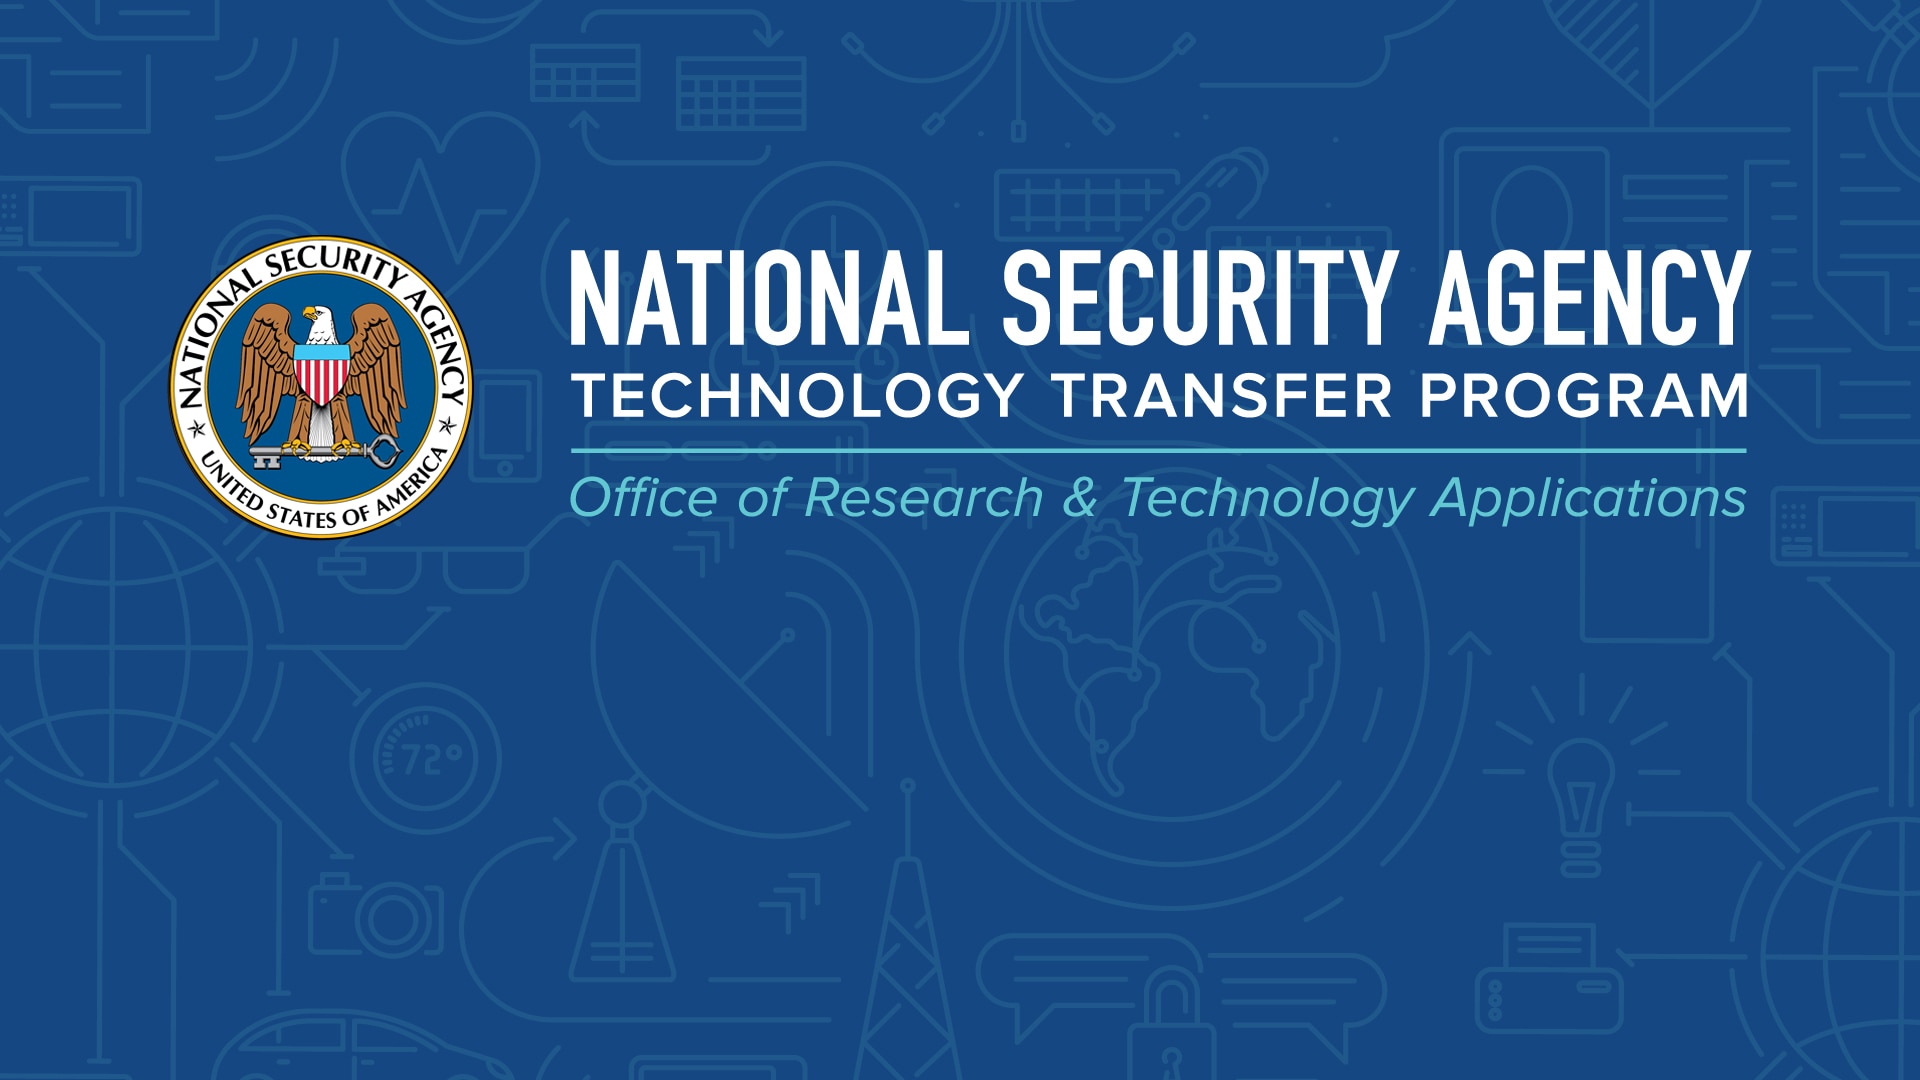 NSA Technology Transfer Program
Office of Research and Technology Applications